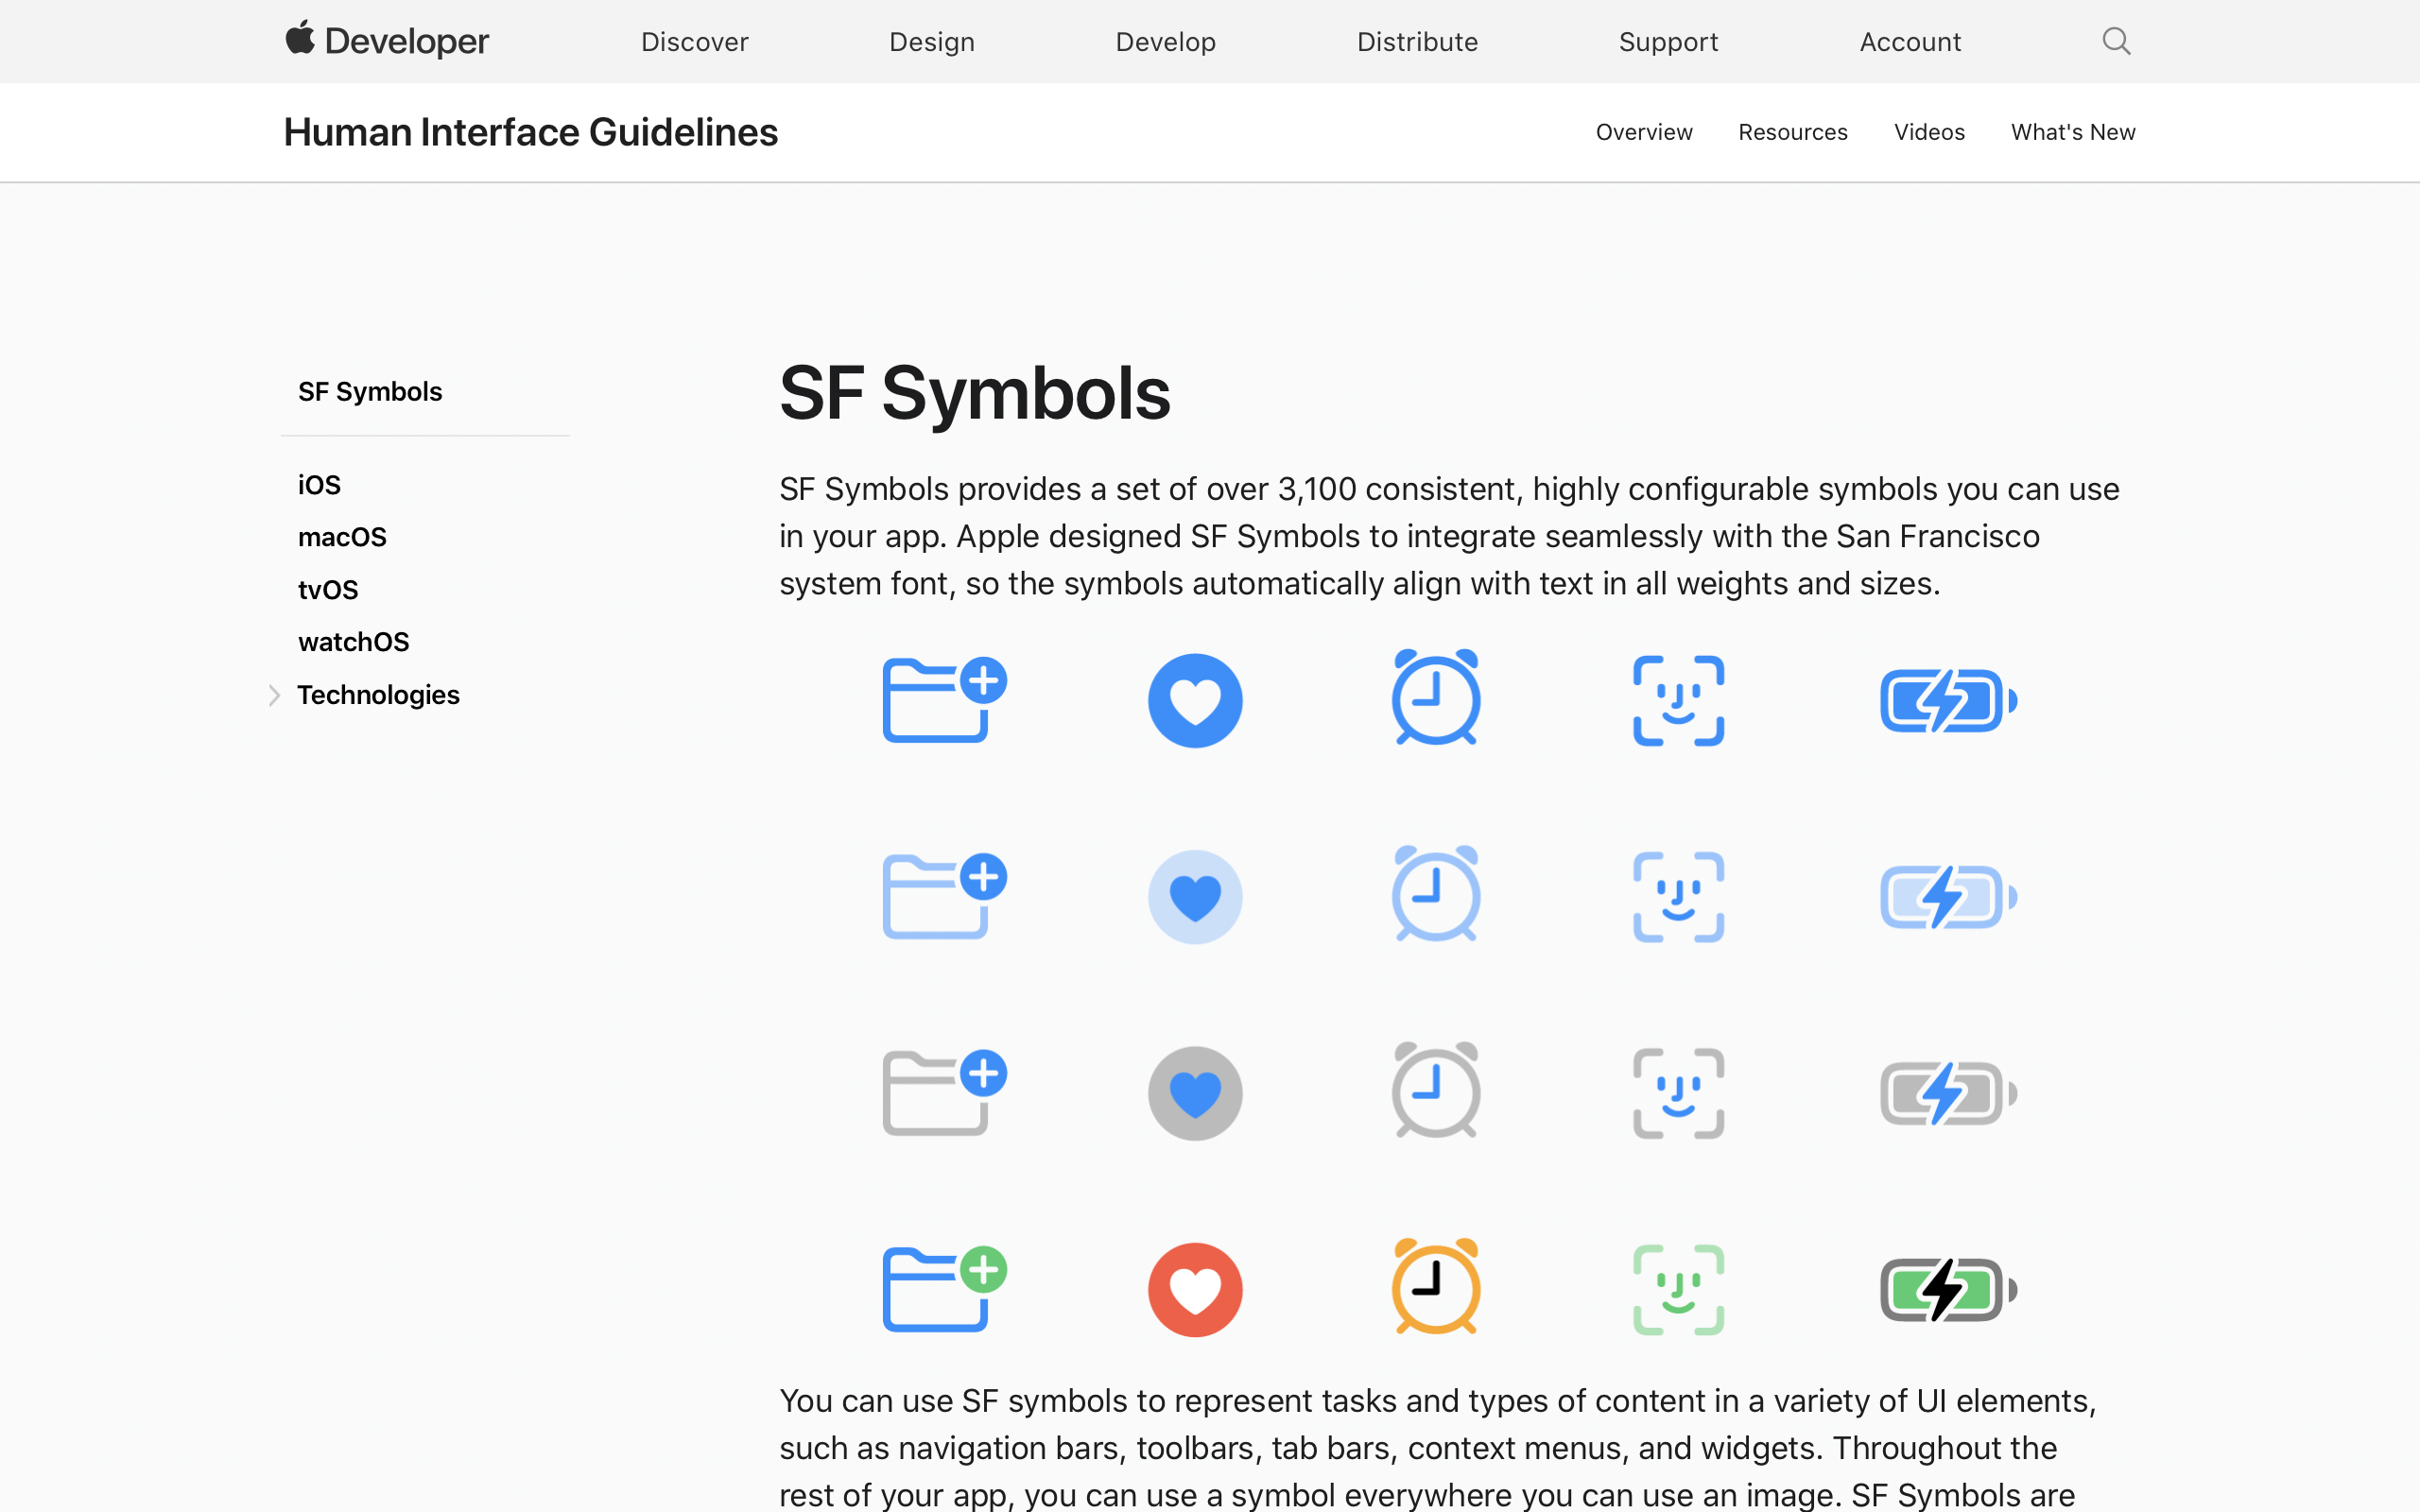 Wikipedia for iOS app: Icons.